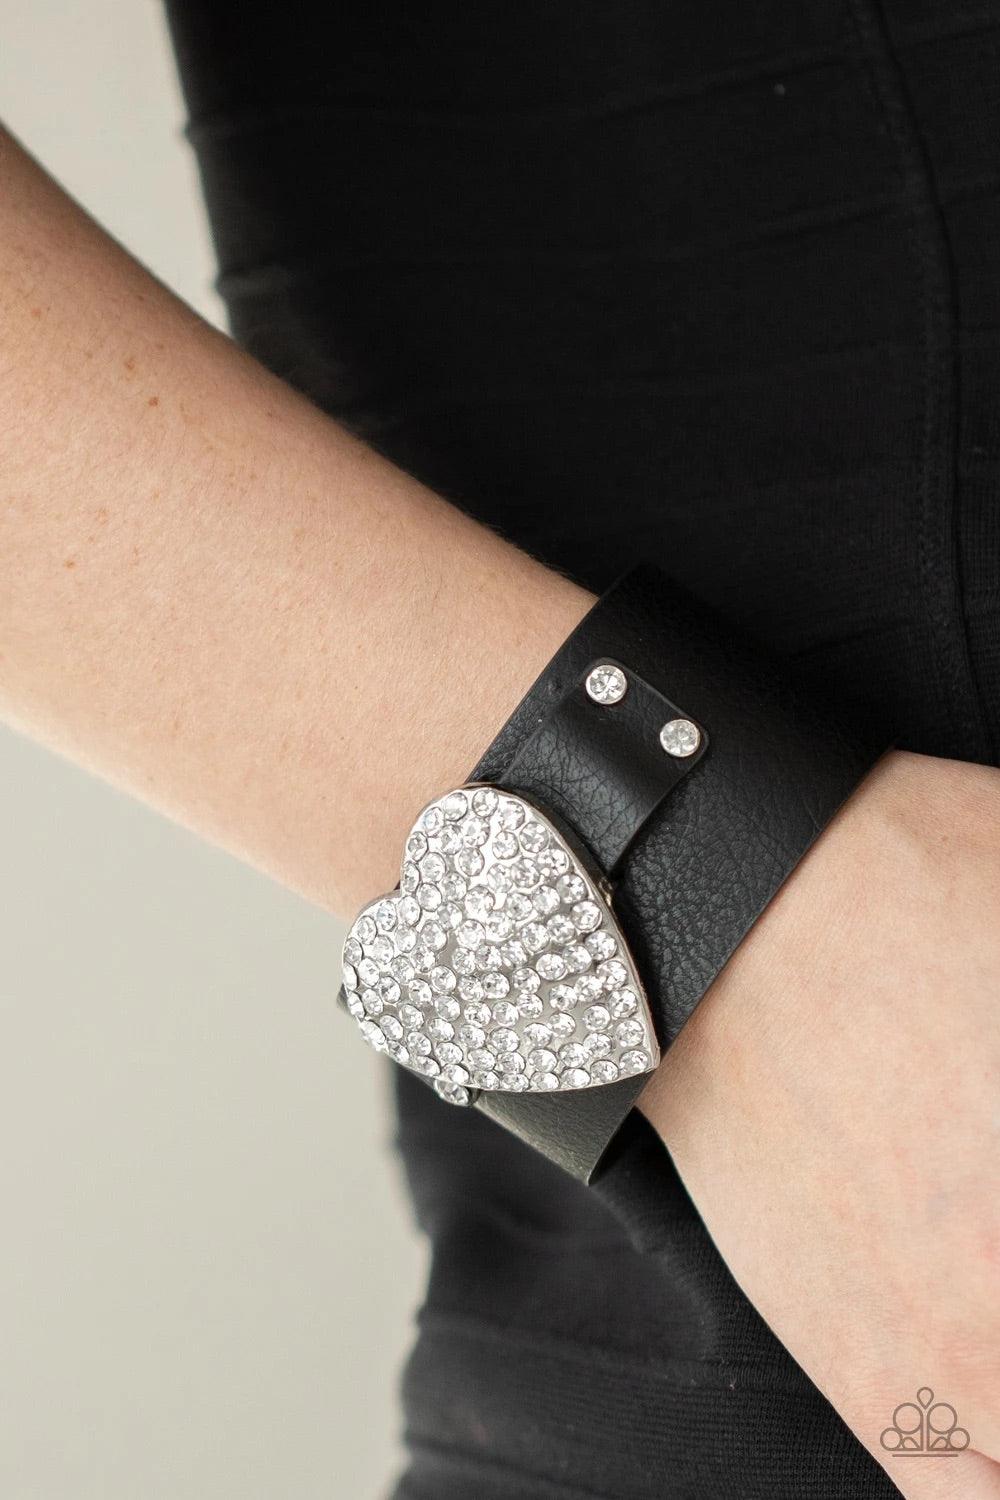 Paparazzi Accessories Flauntable Flirt - Black Encrusted in blinding white rhinestones, an oversized silver heart frame is studded in place across the front of a black leather band, creating a flirtatious centerpiece around the wrist. Features an adjustab